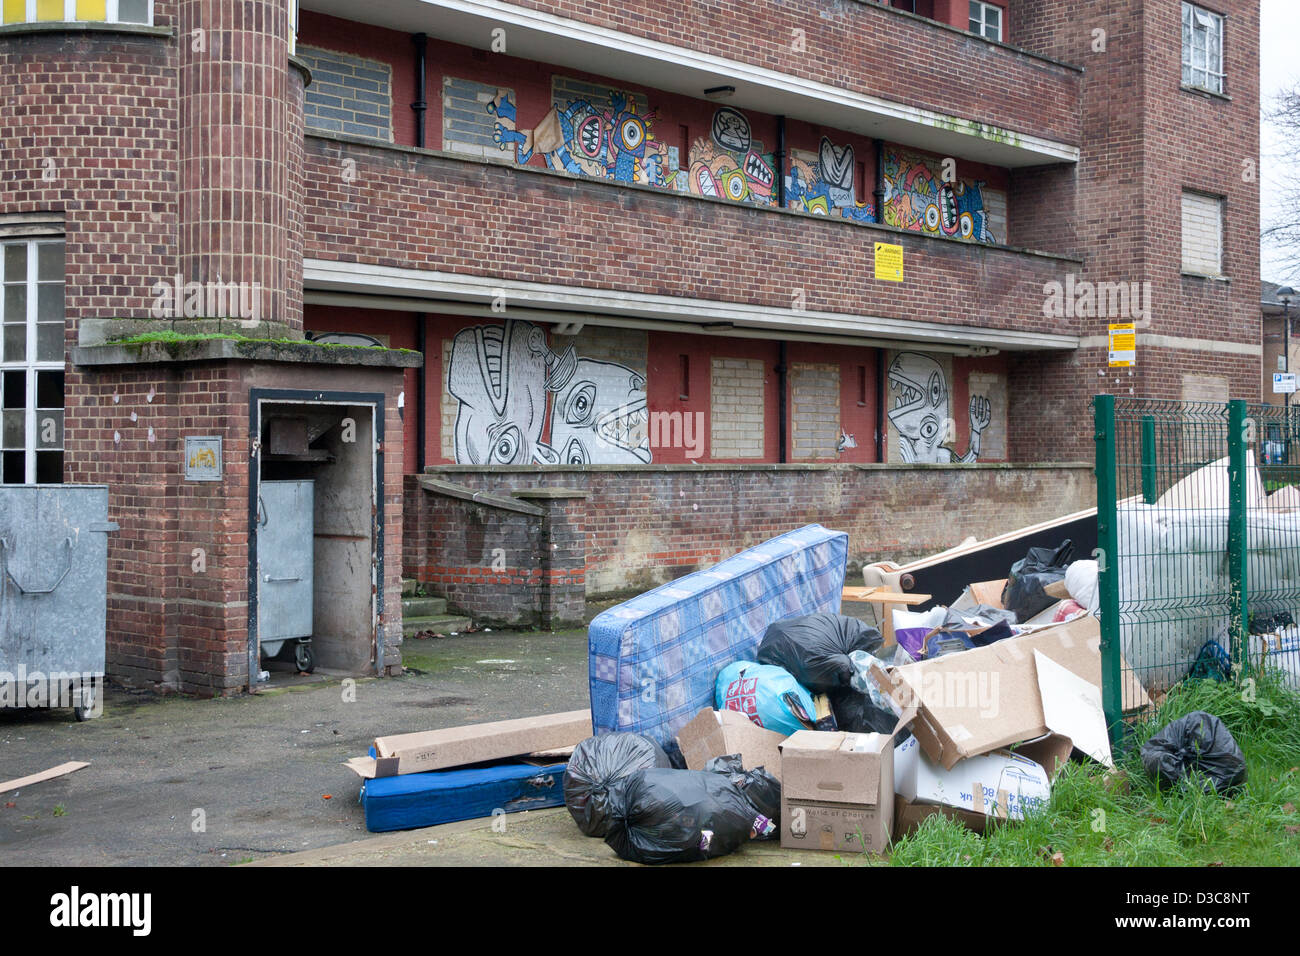 1930s housing estate condemned and awaiting demolition Haggerston Borough of Hackney East End London England UK Stock Photo